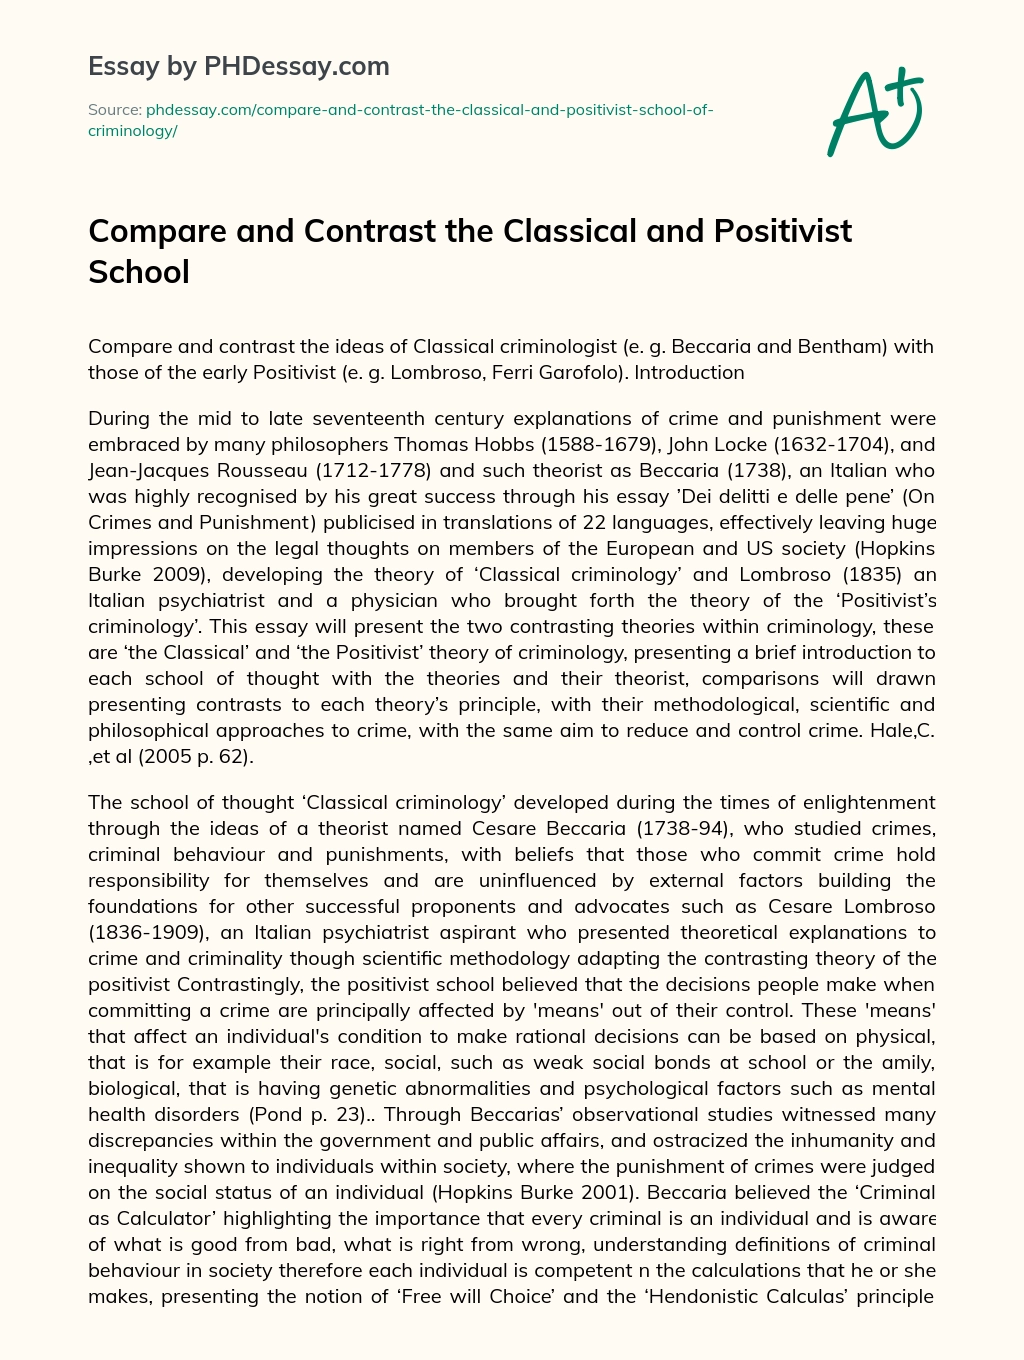 Compare and Contrast the Classical and Positivist School essay